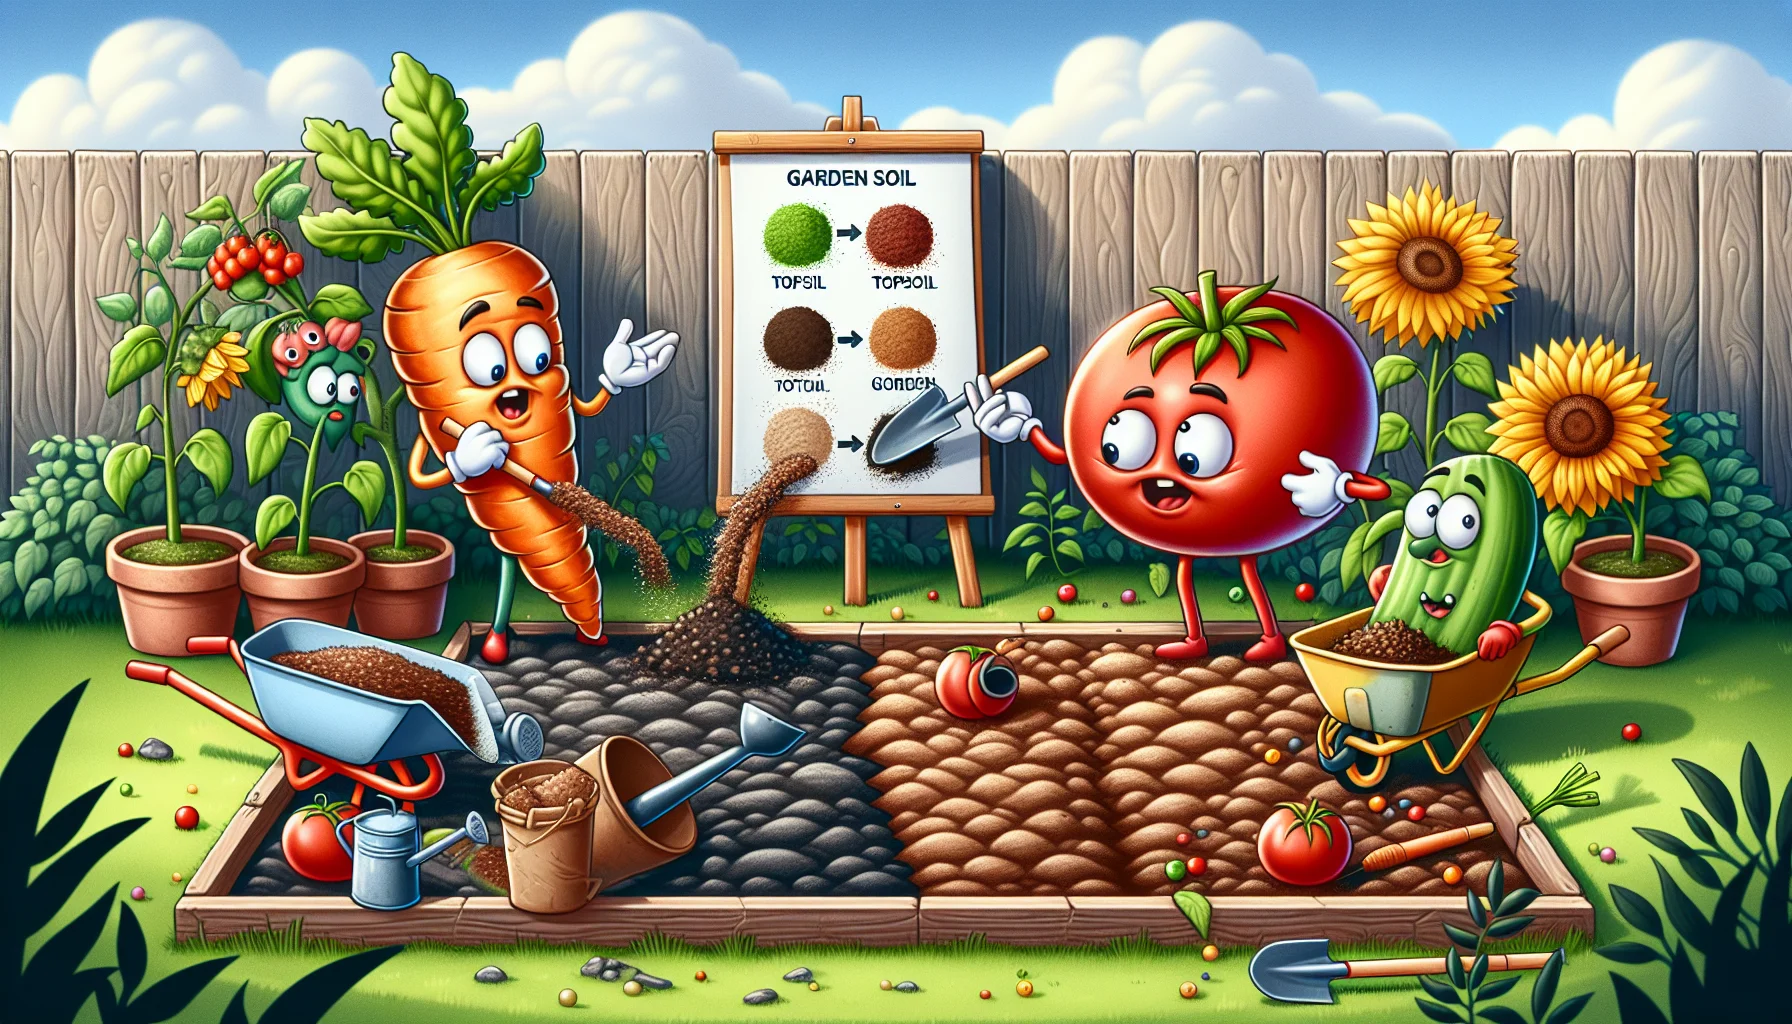 Create a fun, detailed image that illustrates the difference between topsoil and garden soil. Let's imagine a quirky scenario where an animated group of vegetables are preparing a garden bed. The carrot is shovelling topsoil on one side while the tomato is sprinkling garden soil on the other side. They can be seen goofily comparing the contents of their soils, wearing confused expressions. A playful sunflower as the teacher uses a chart to explain soil properties. The surrounding area is lush with plants, a wheelbarrow filled with soil and gardening tools leaning against a rustic fence. This image is meant to inspire people to love gardening.